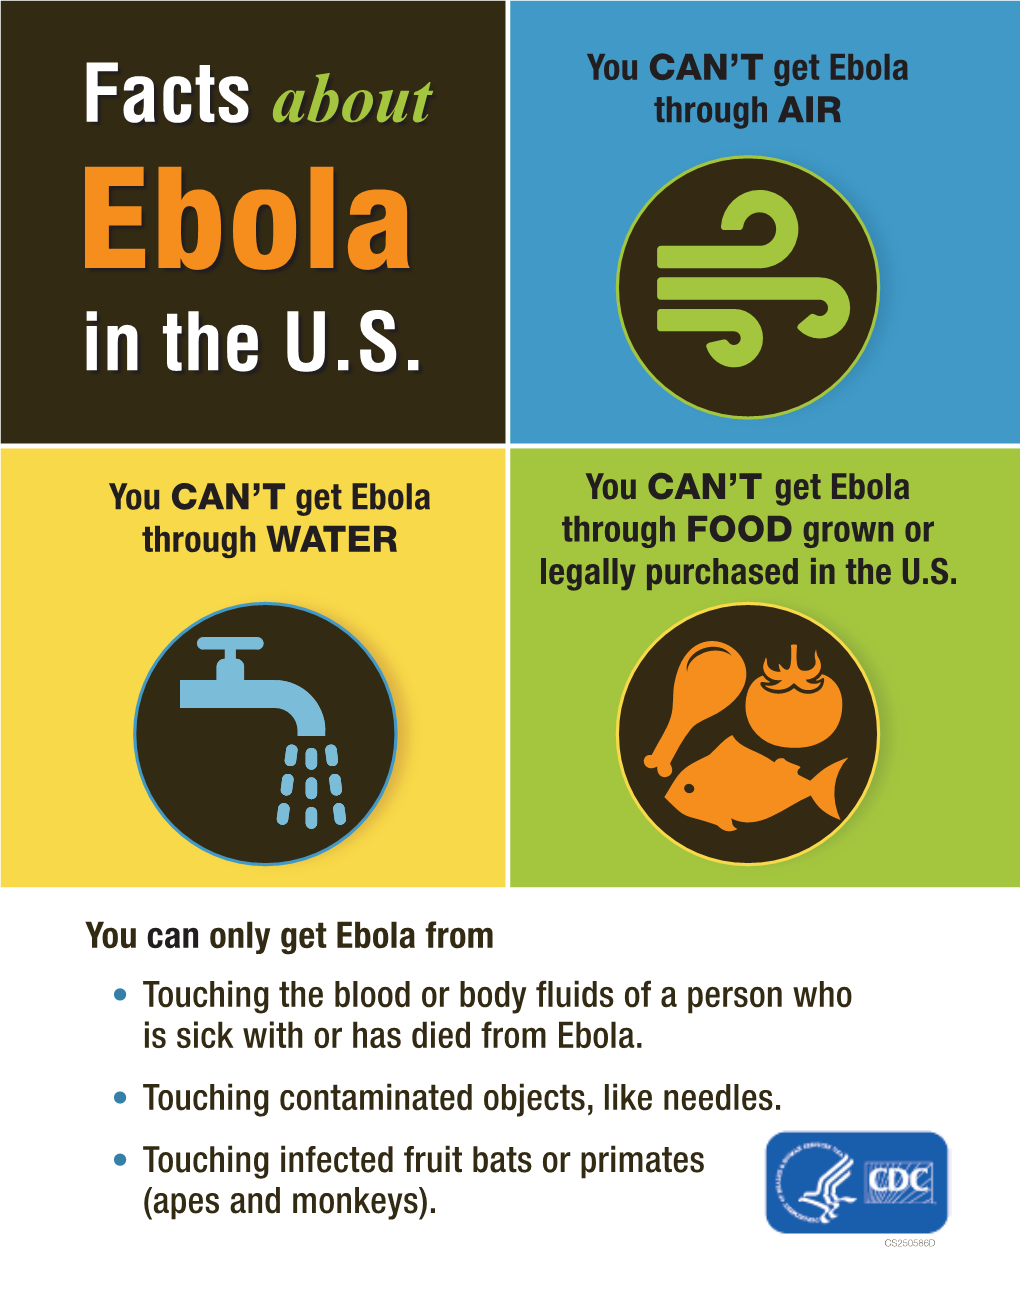 Ebola Facts About Through AIR Ebola in the U.S